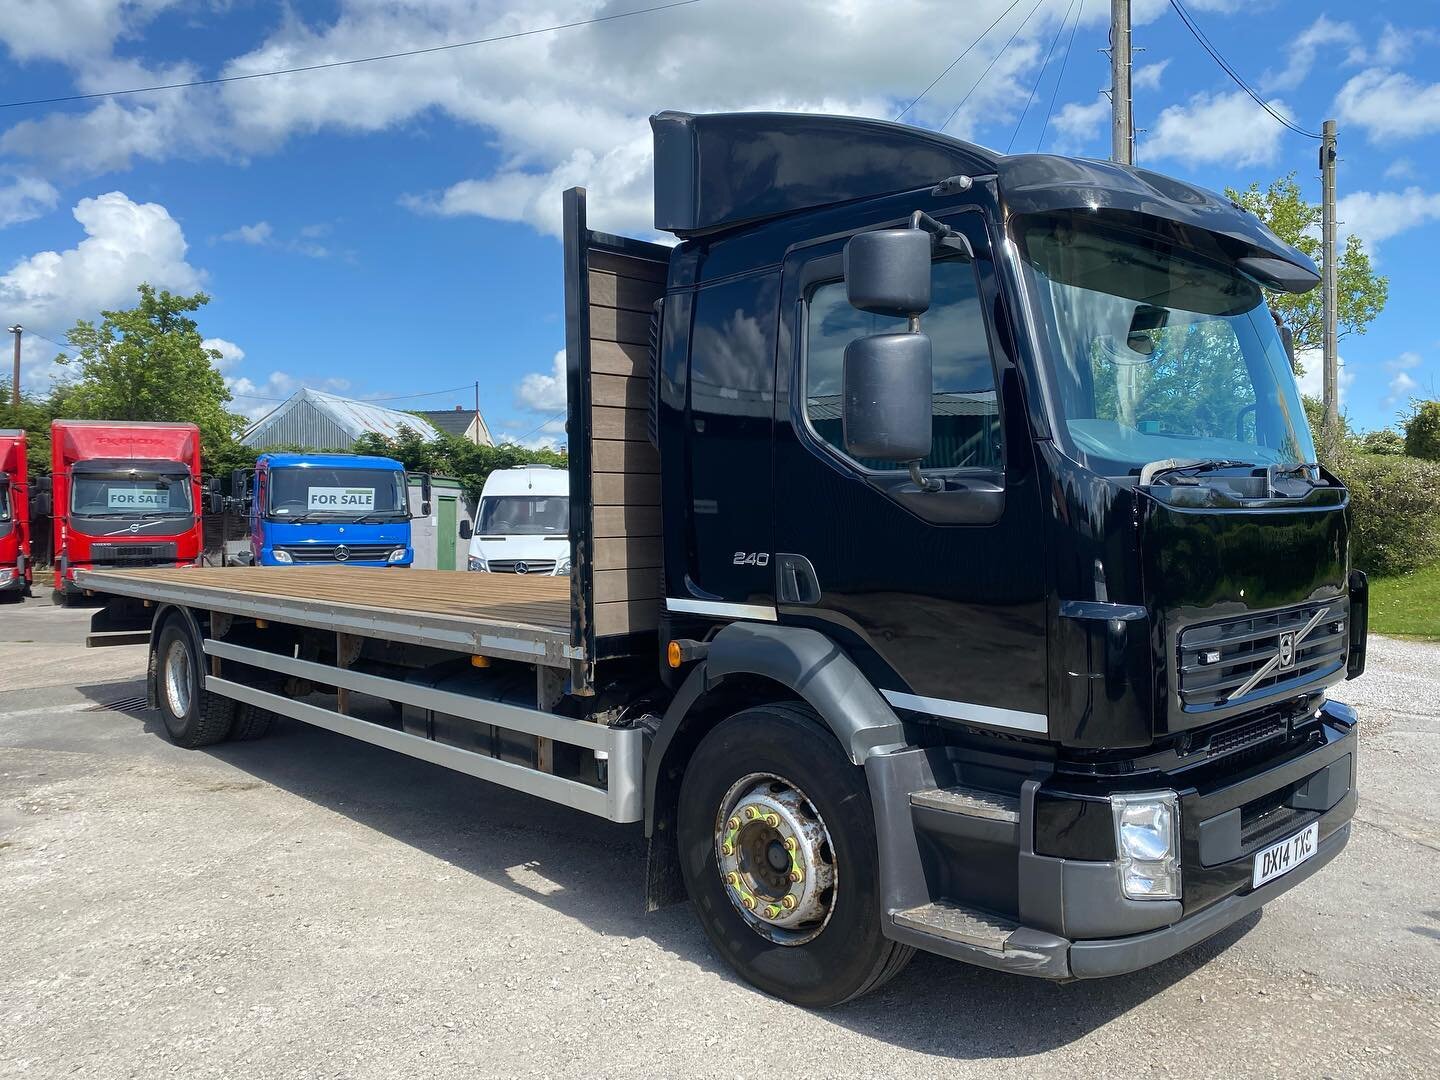 2014 (14) Volvo FL240 4x2 6.2 Metre Wheelbase Comfort Cab Chassis on rear air suspension. Complete with a 26Ft Very good quality Flatbed body which was built and mounted just 2 years ago. Fold down bunk with plenty of storage underneath, LED loading 